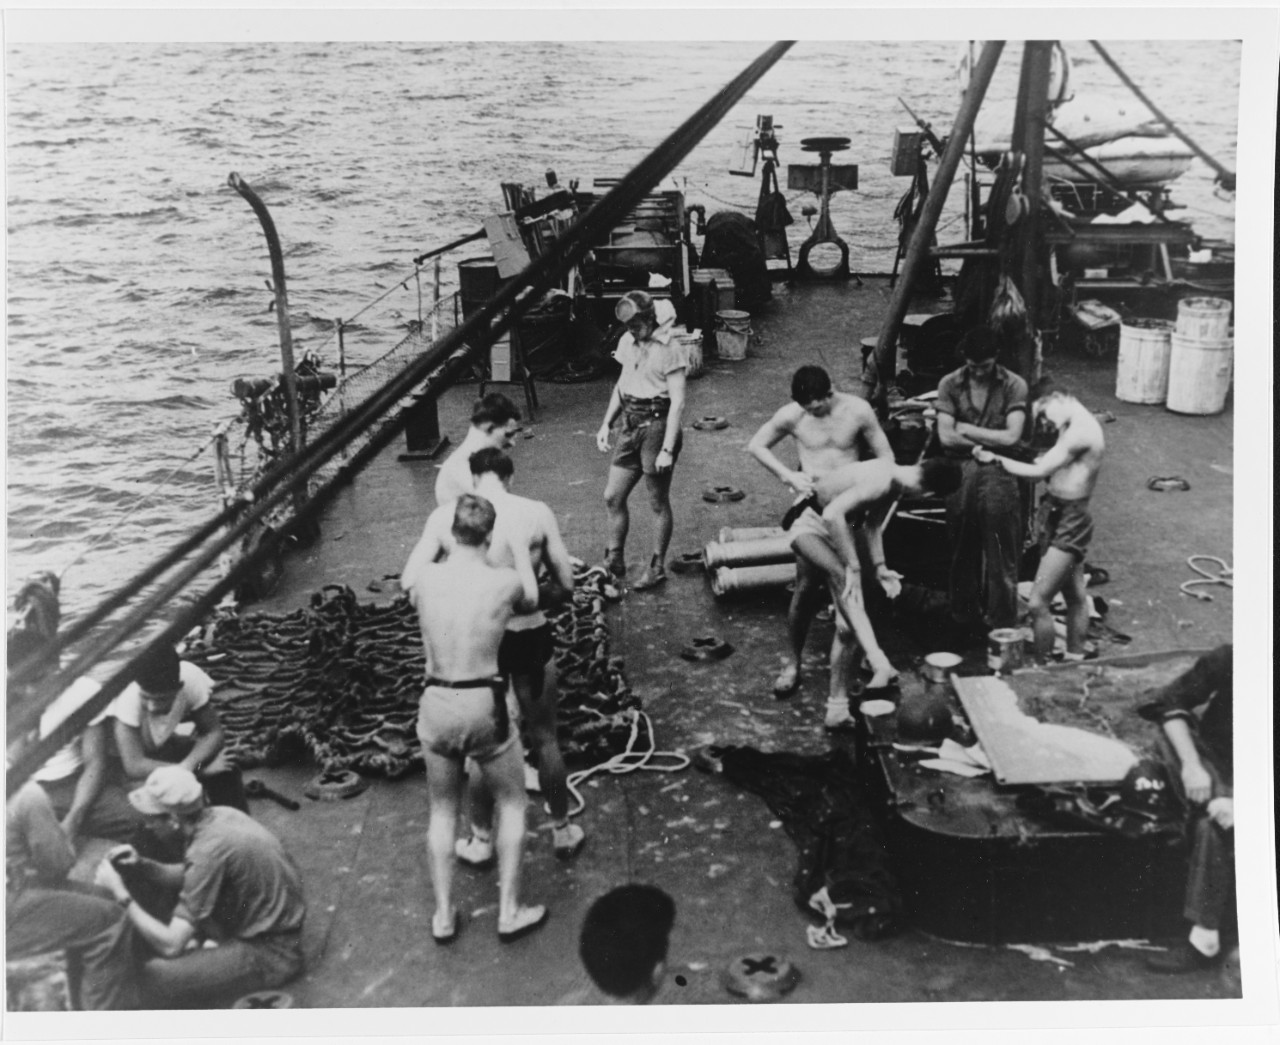 Okinawa UDT members daubed aluminum paint on their bodies as camouflage to throw off Japanese marksmen. Photographed on the fantail of a fast transport (APD), circa Spring 1945 80-G-274695